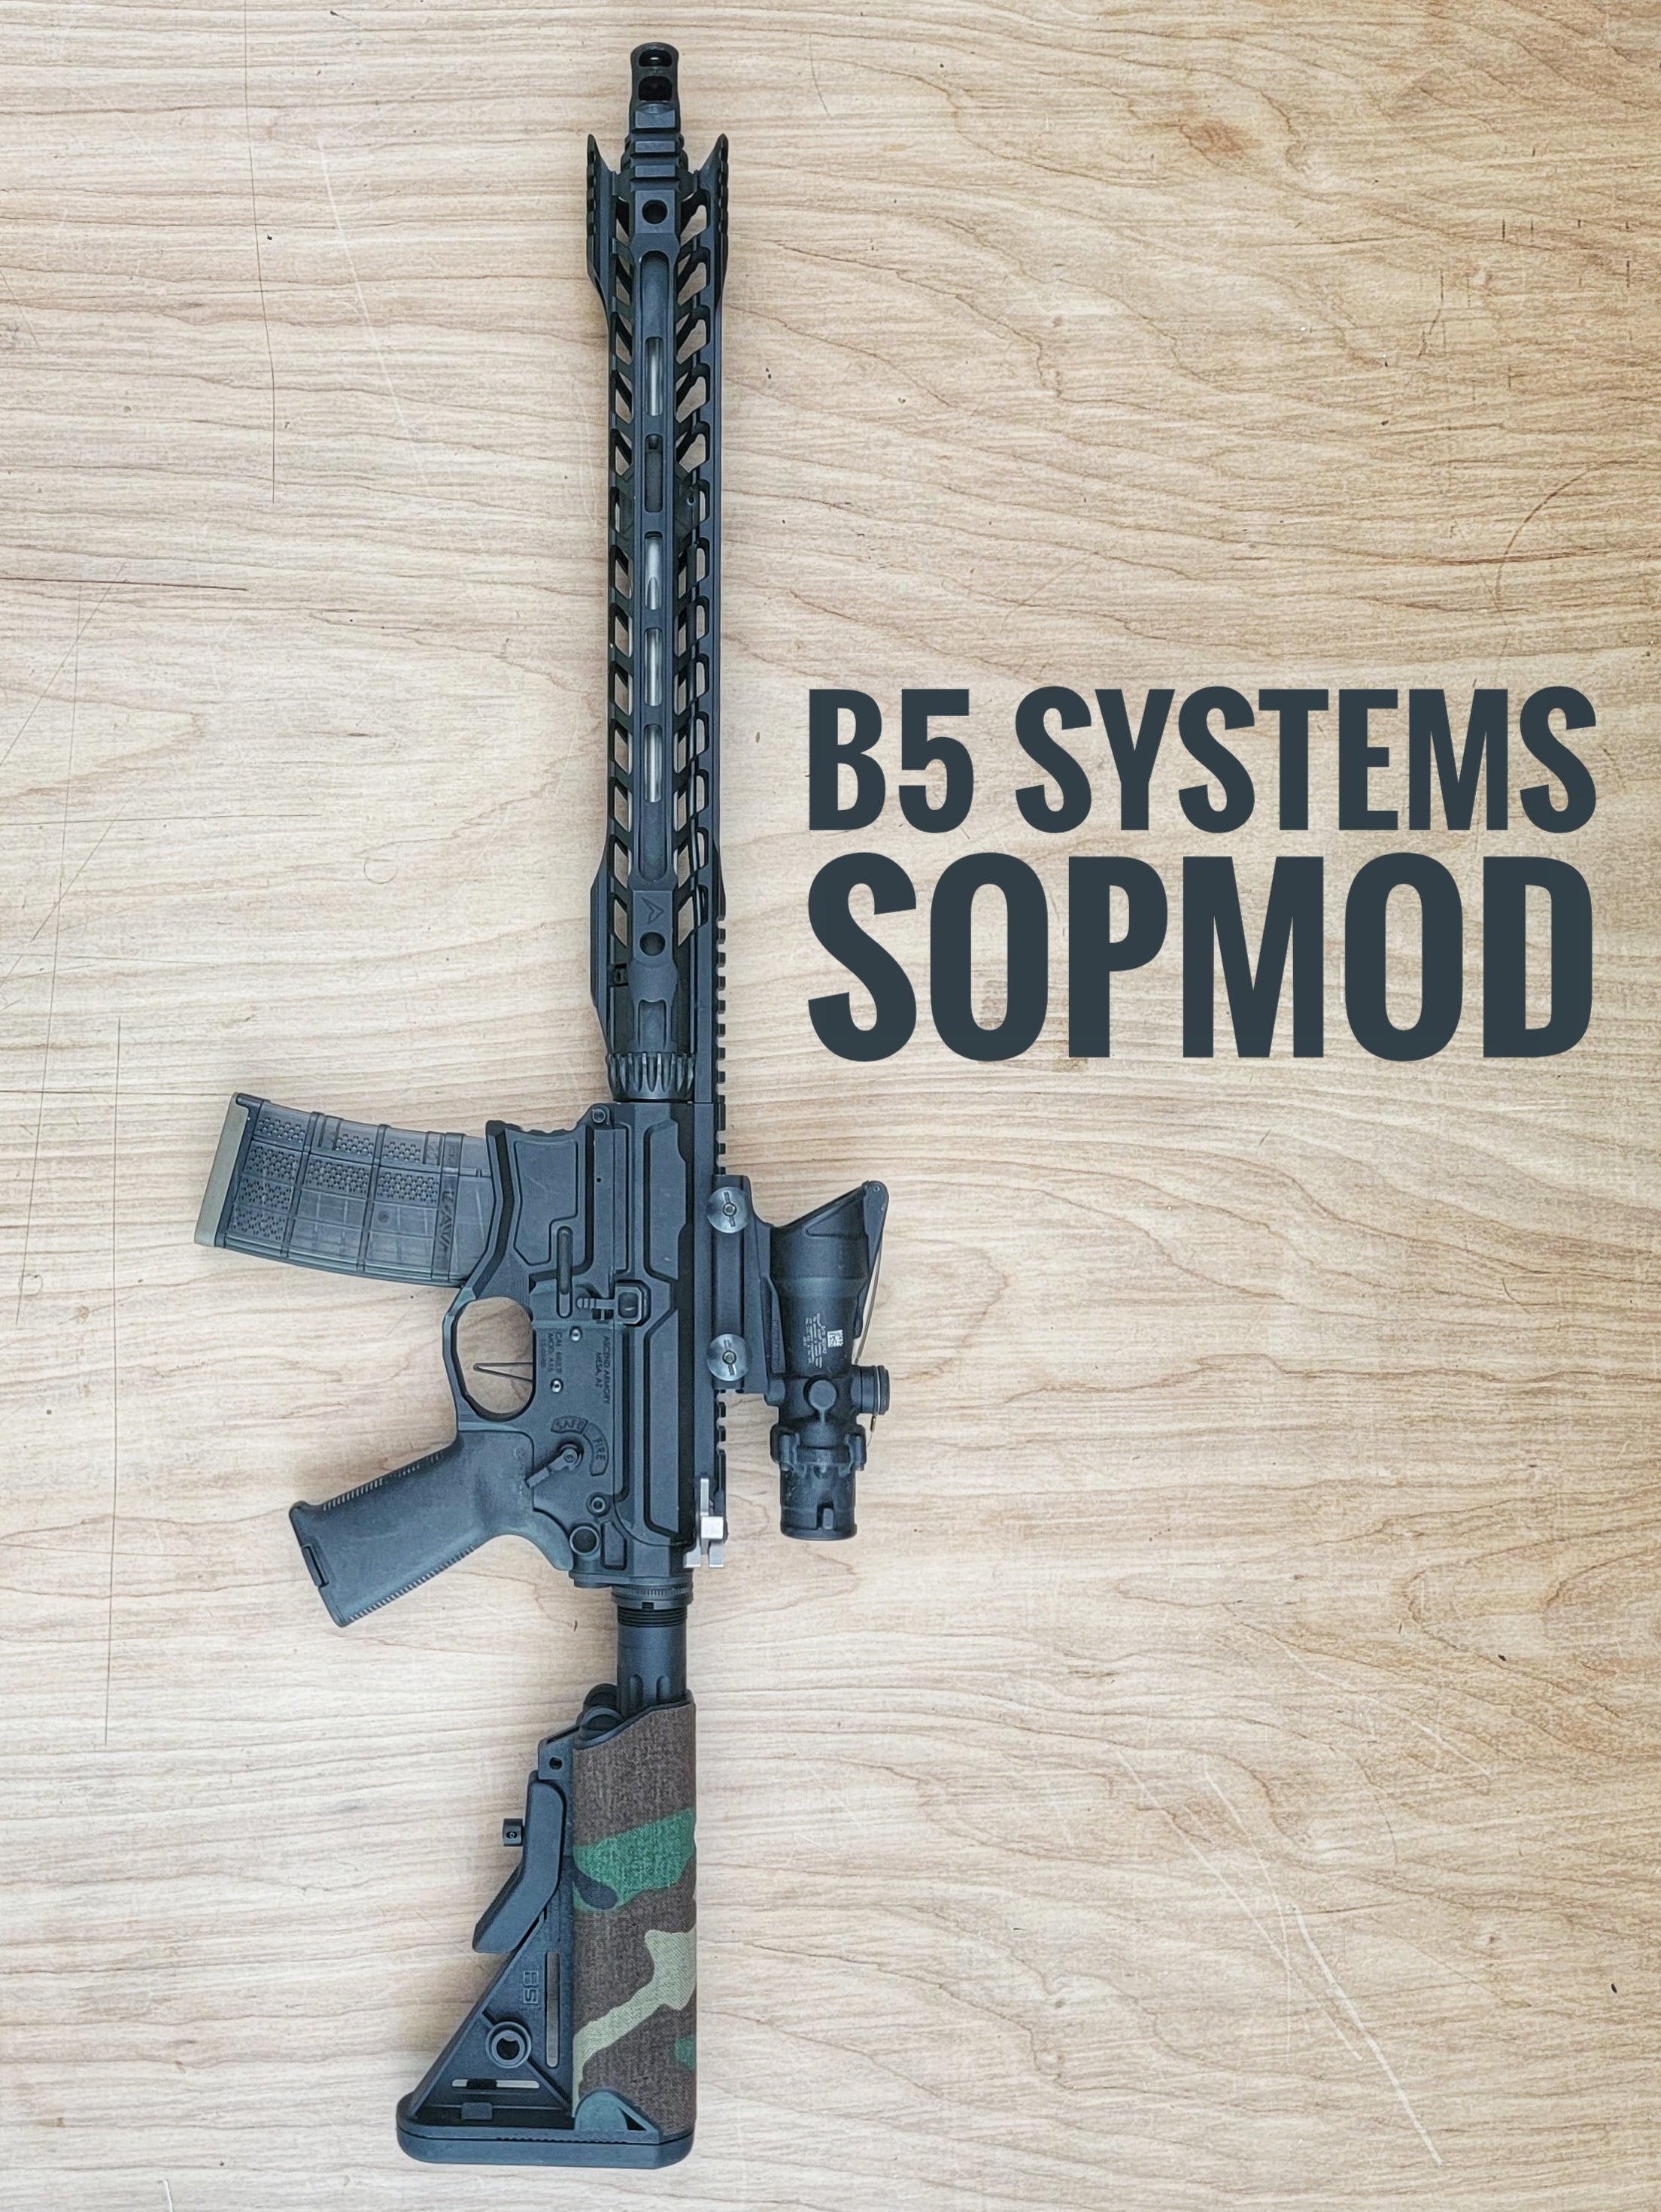 B5 Systems SOPMOD stock (fits LMT also) – Tact Wrap